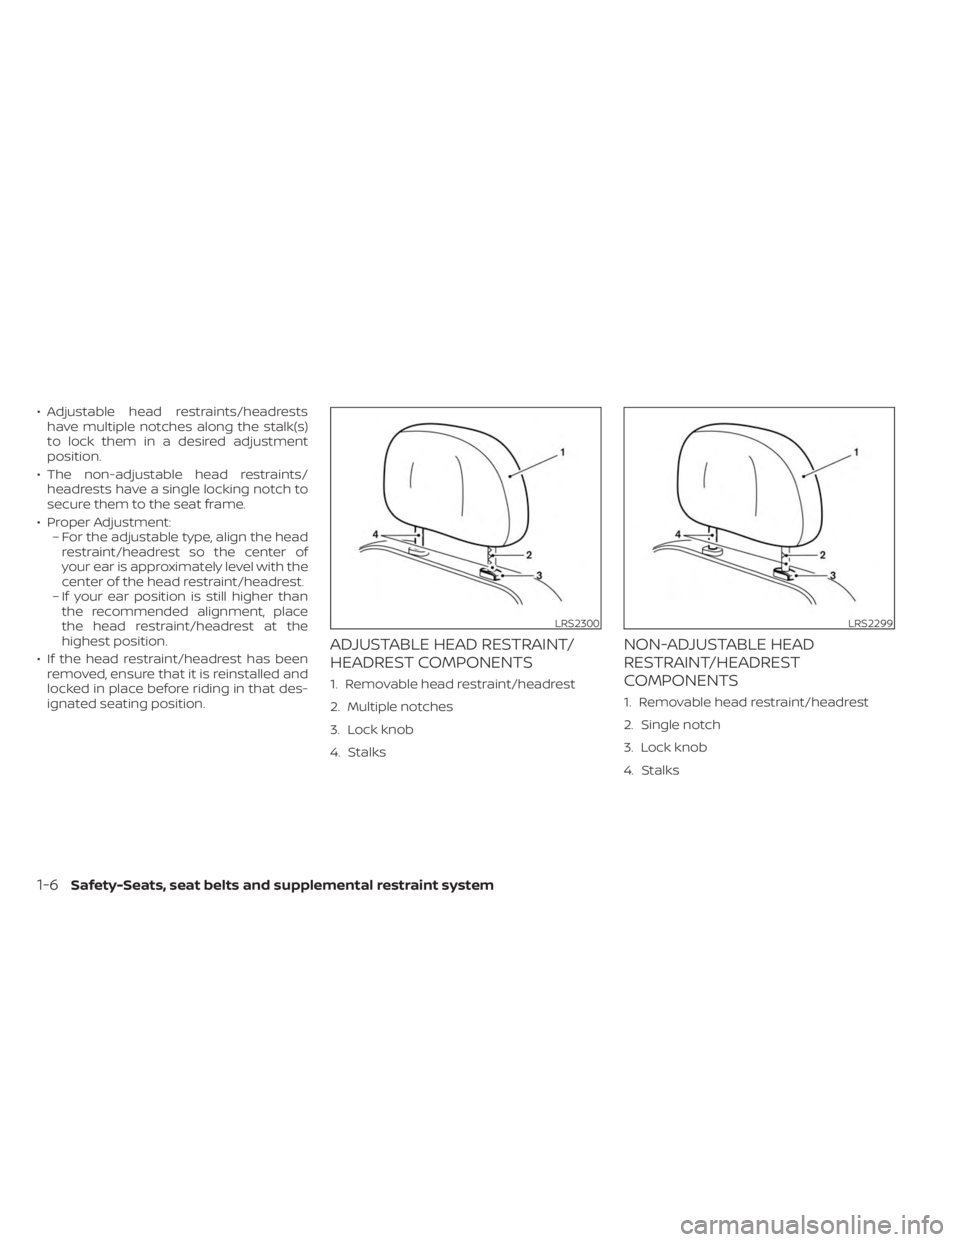 NISSAN KICKS 2023  Owners Manual • Adjustable head restraints/headrestshave multiple notches along the stalk(s)
to lock them in a desired adjustment
position.
• The non-adjustable head restraints/ headrests have a single locking 